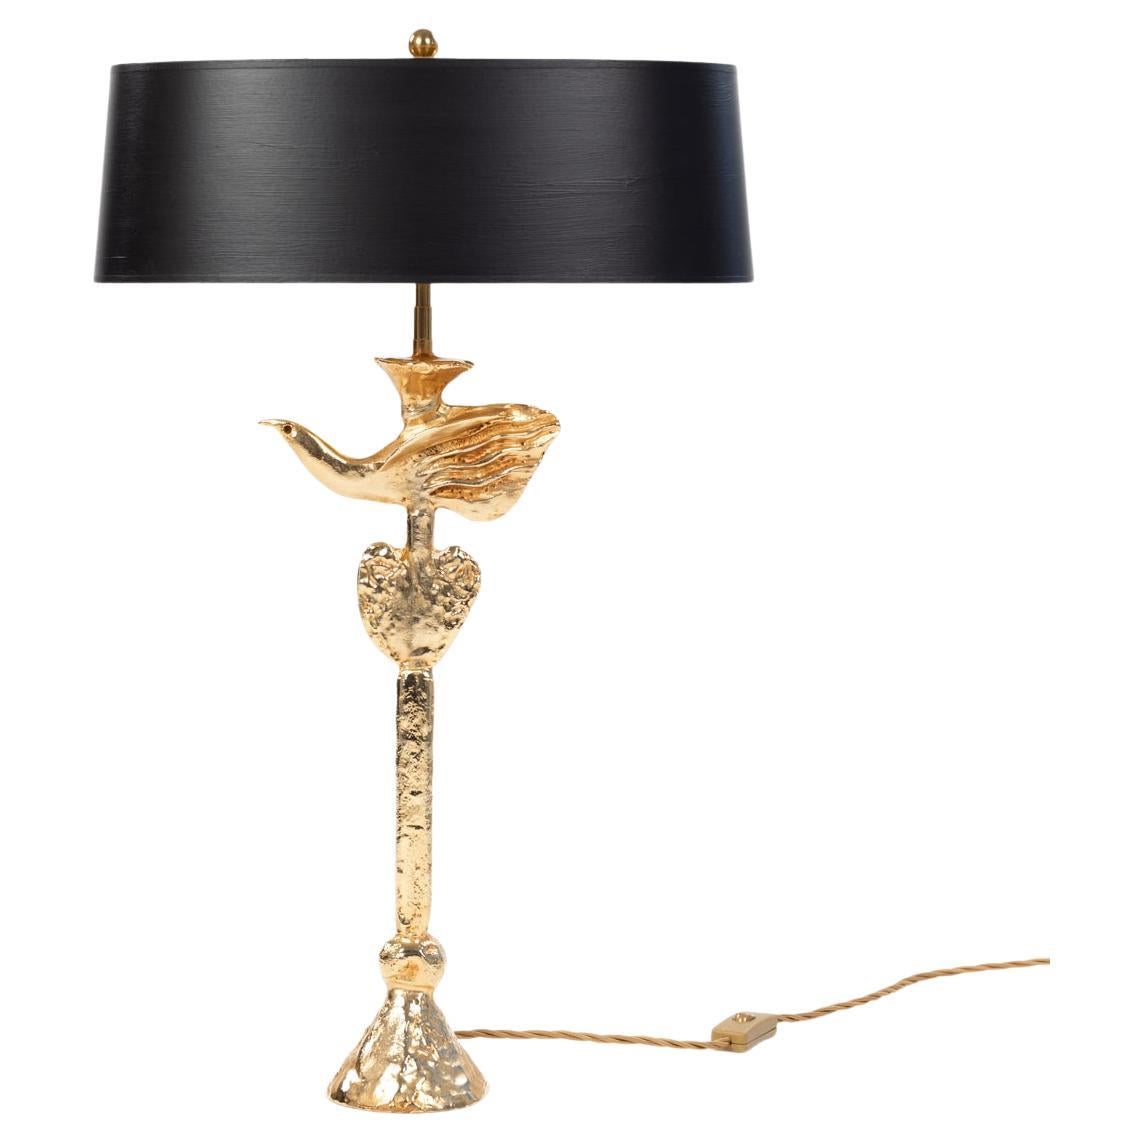 A fantastic 1980's sculptural gilt table lamp by Pierre Casenove for Fondica, signed.
Heavy, cast bronze object, fire-gilded. 
The electrics have been completely reworked, 2 transversely seated sockets with a little distance to the object ensure